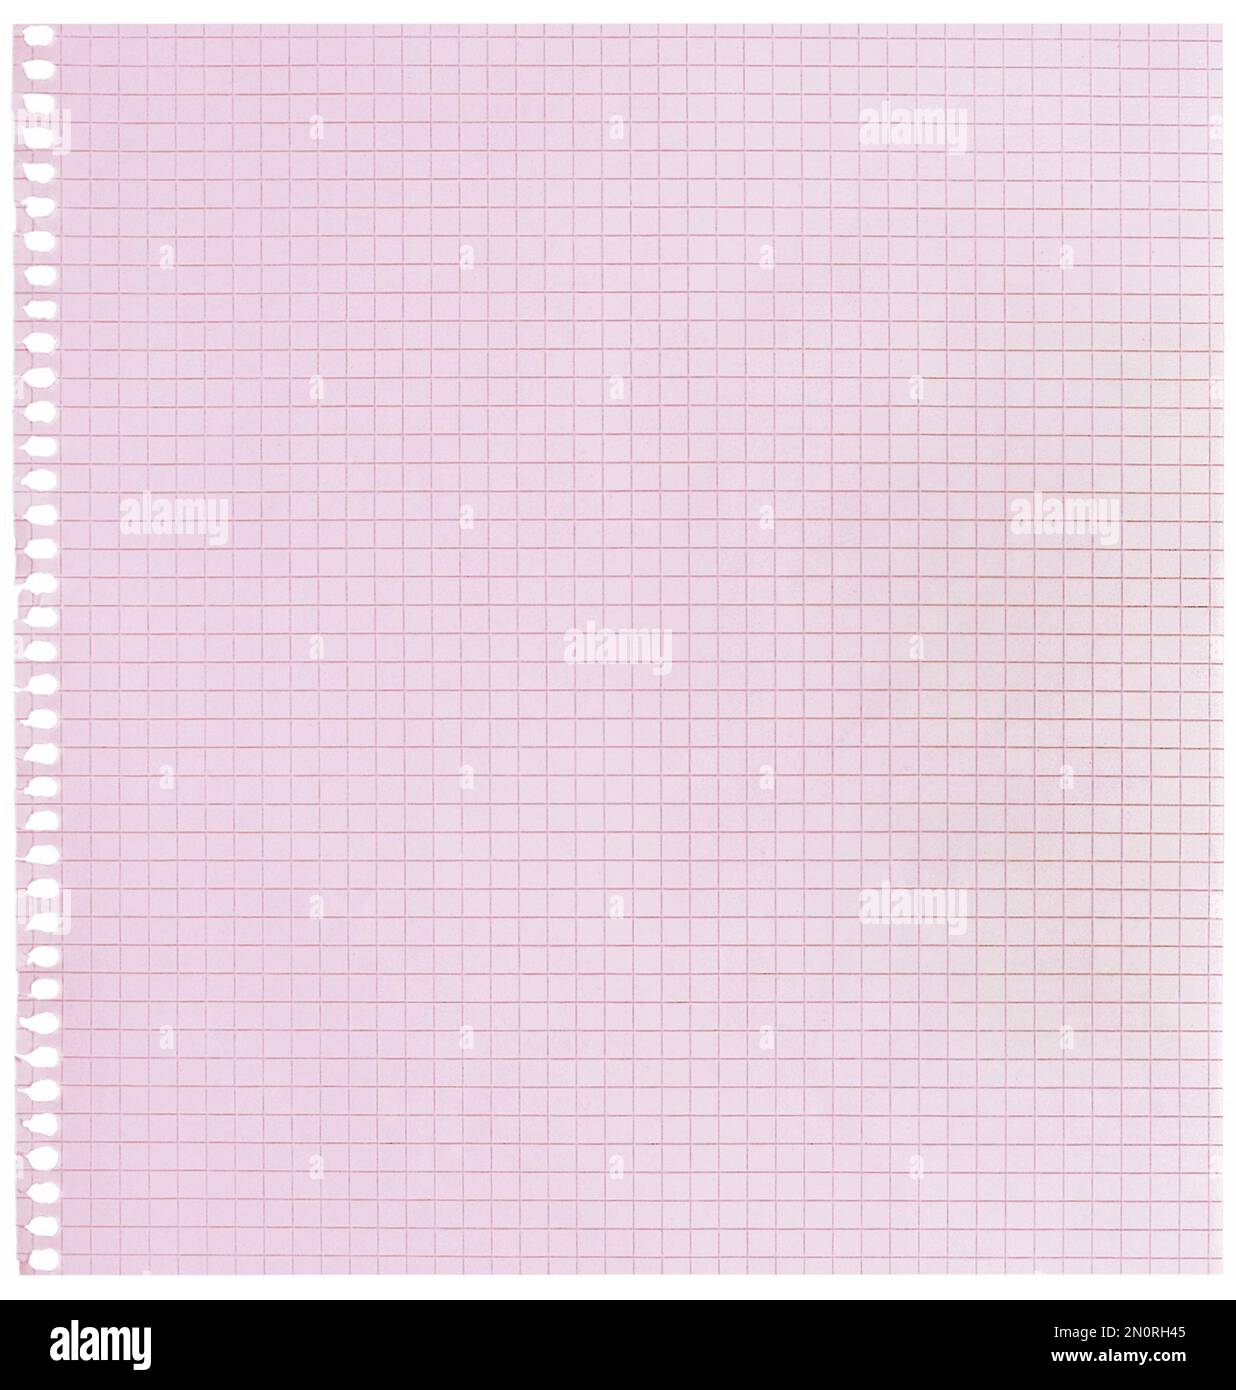 Checked spiral notebook page paper background, old aged pink chequered ring binder sheet flat lay copy space, vertical squared pattern maths notepad Stock Photo